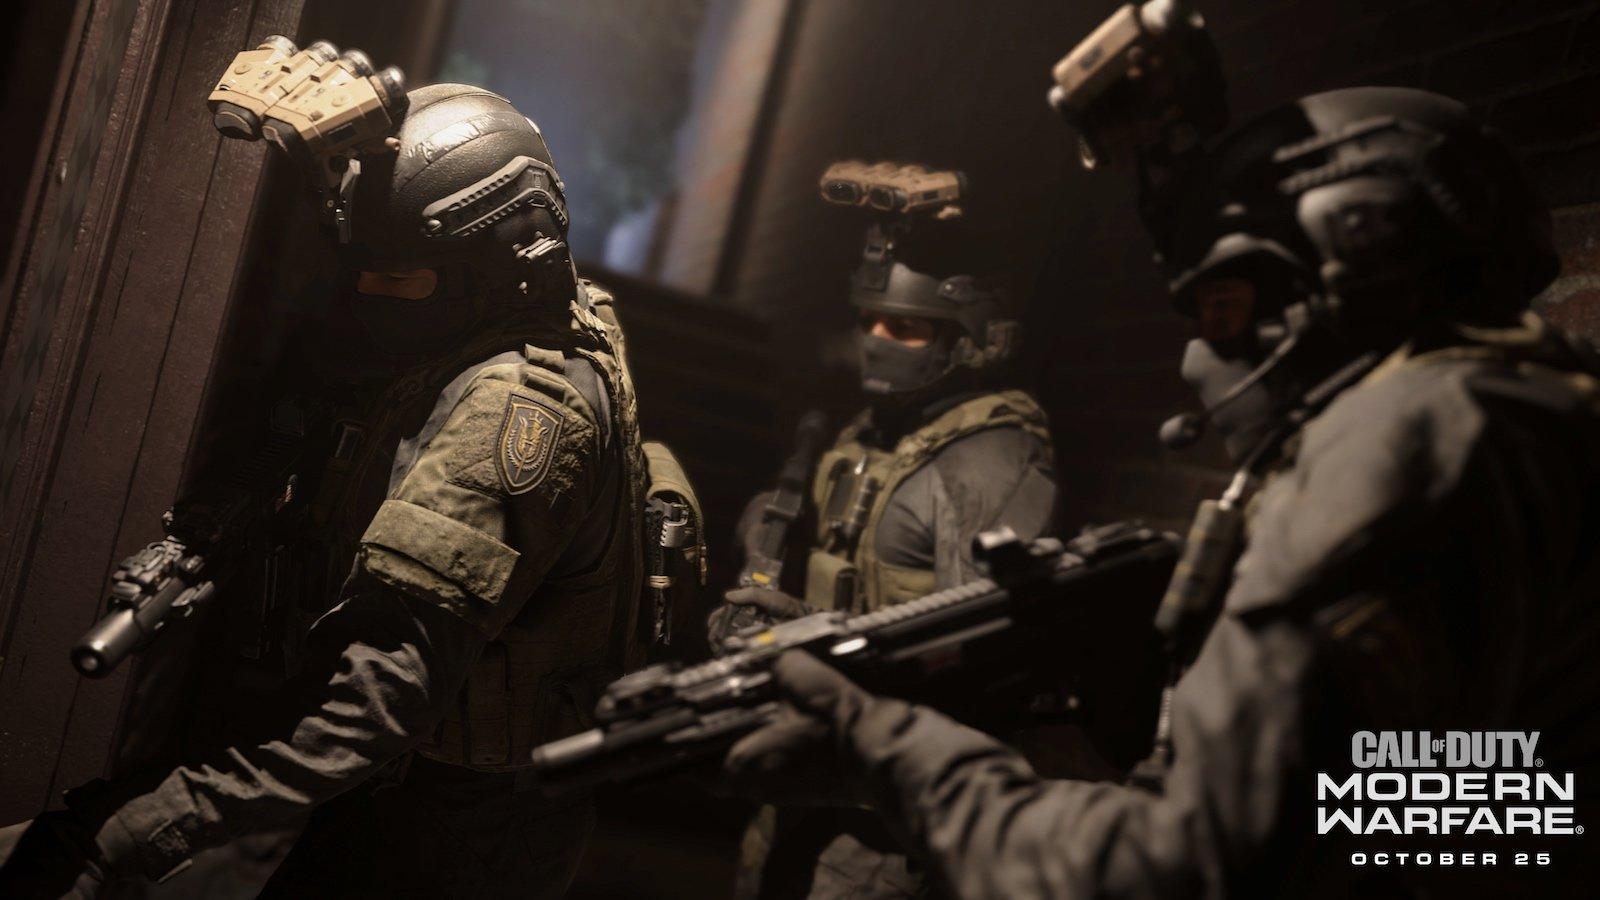 Call Of Duty: Modern Warfare' Arrives October 25th With Cross Play